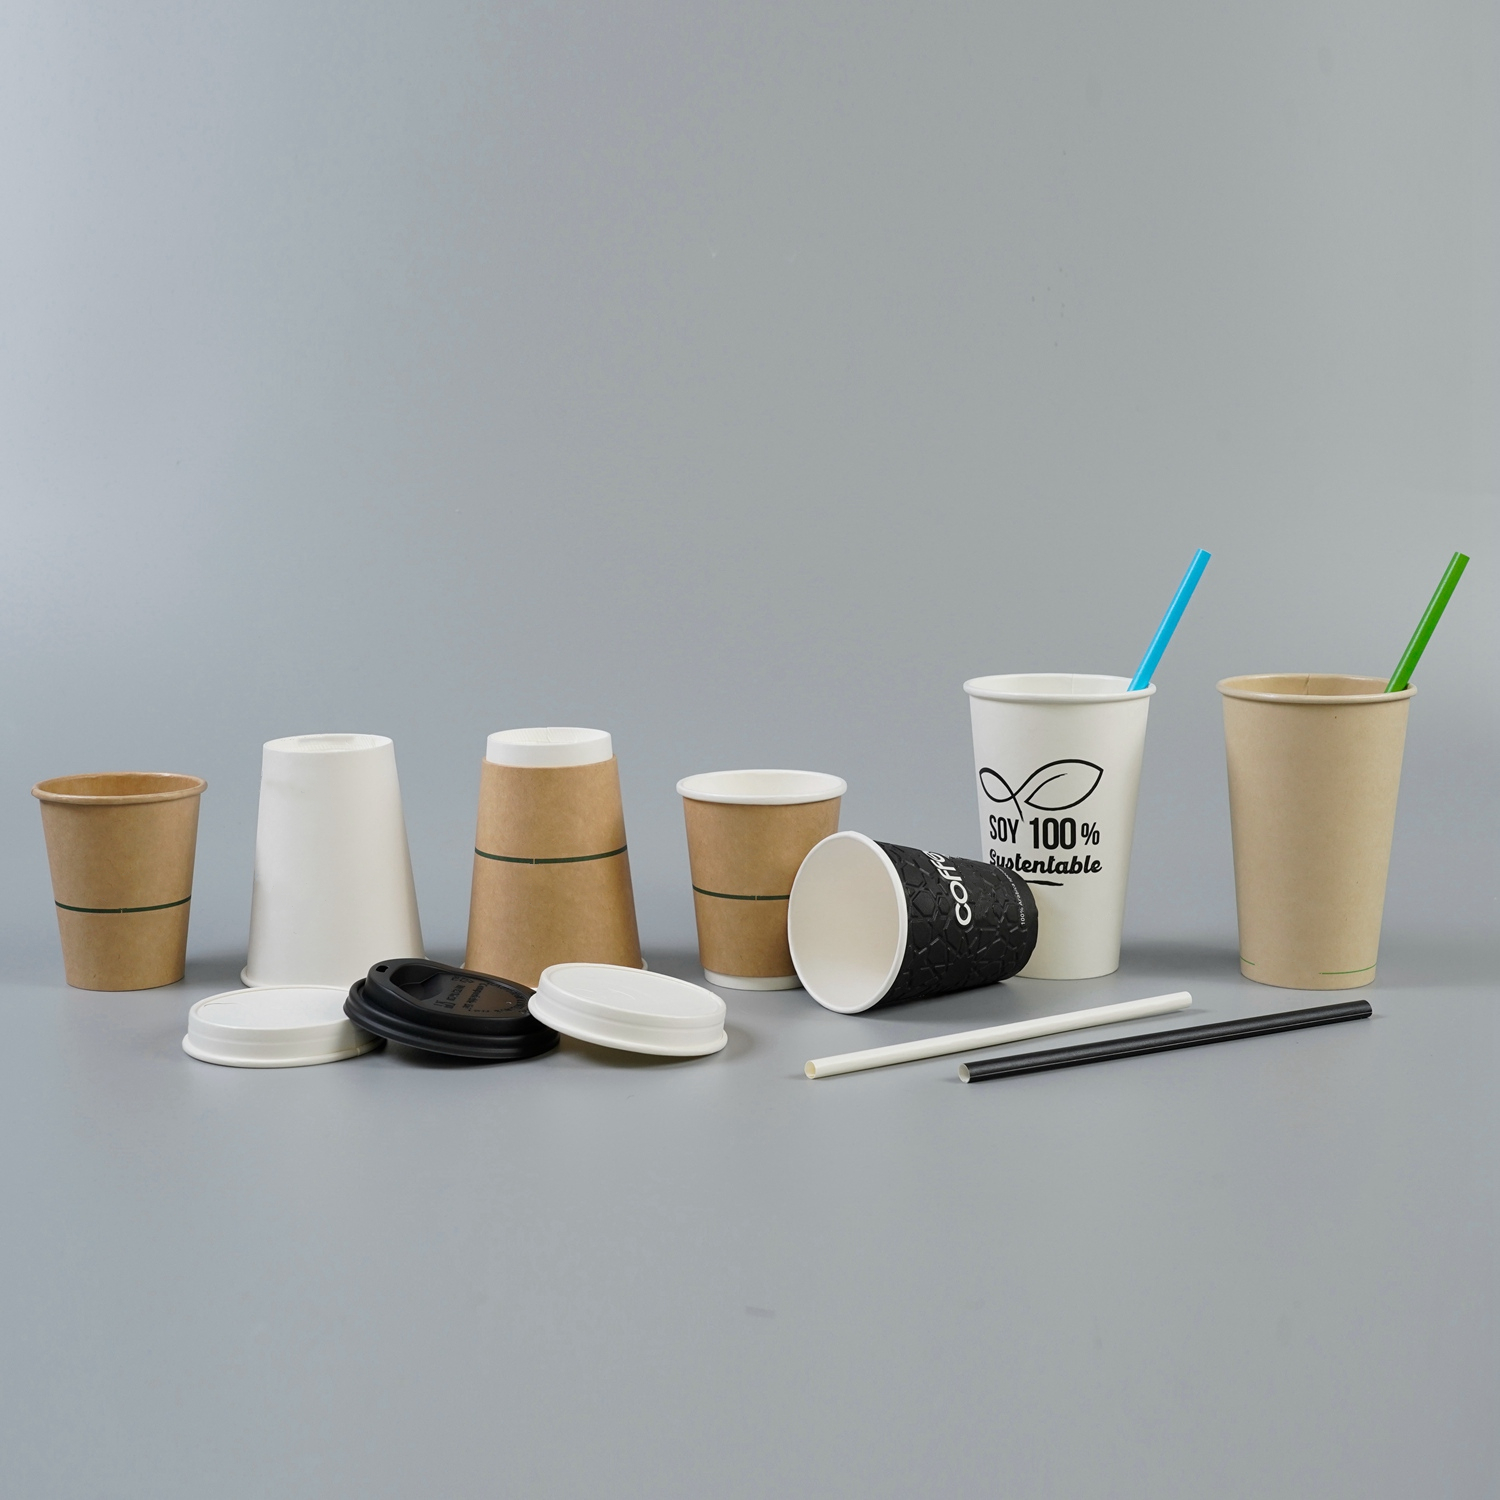 https://images.51microshop.com/12314/product/20220318/12OZ_Single_Wall_Coffee_Paper_Cups_PLA_coating_1647569245186_4.jpg